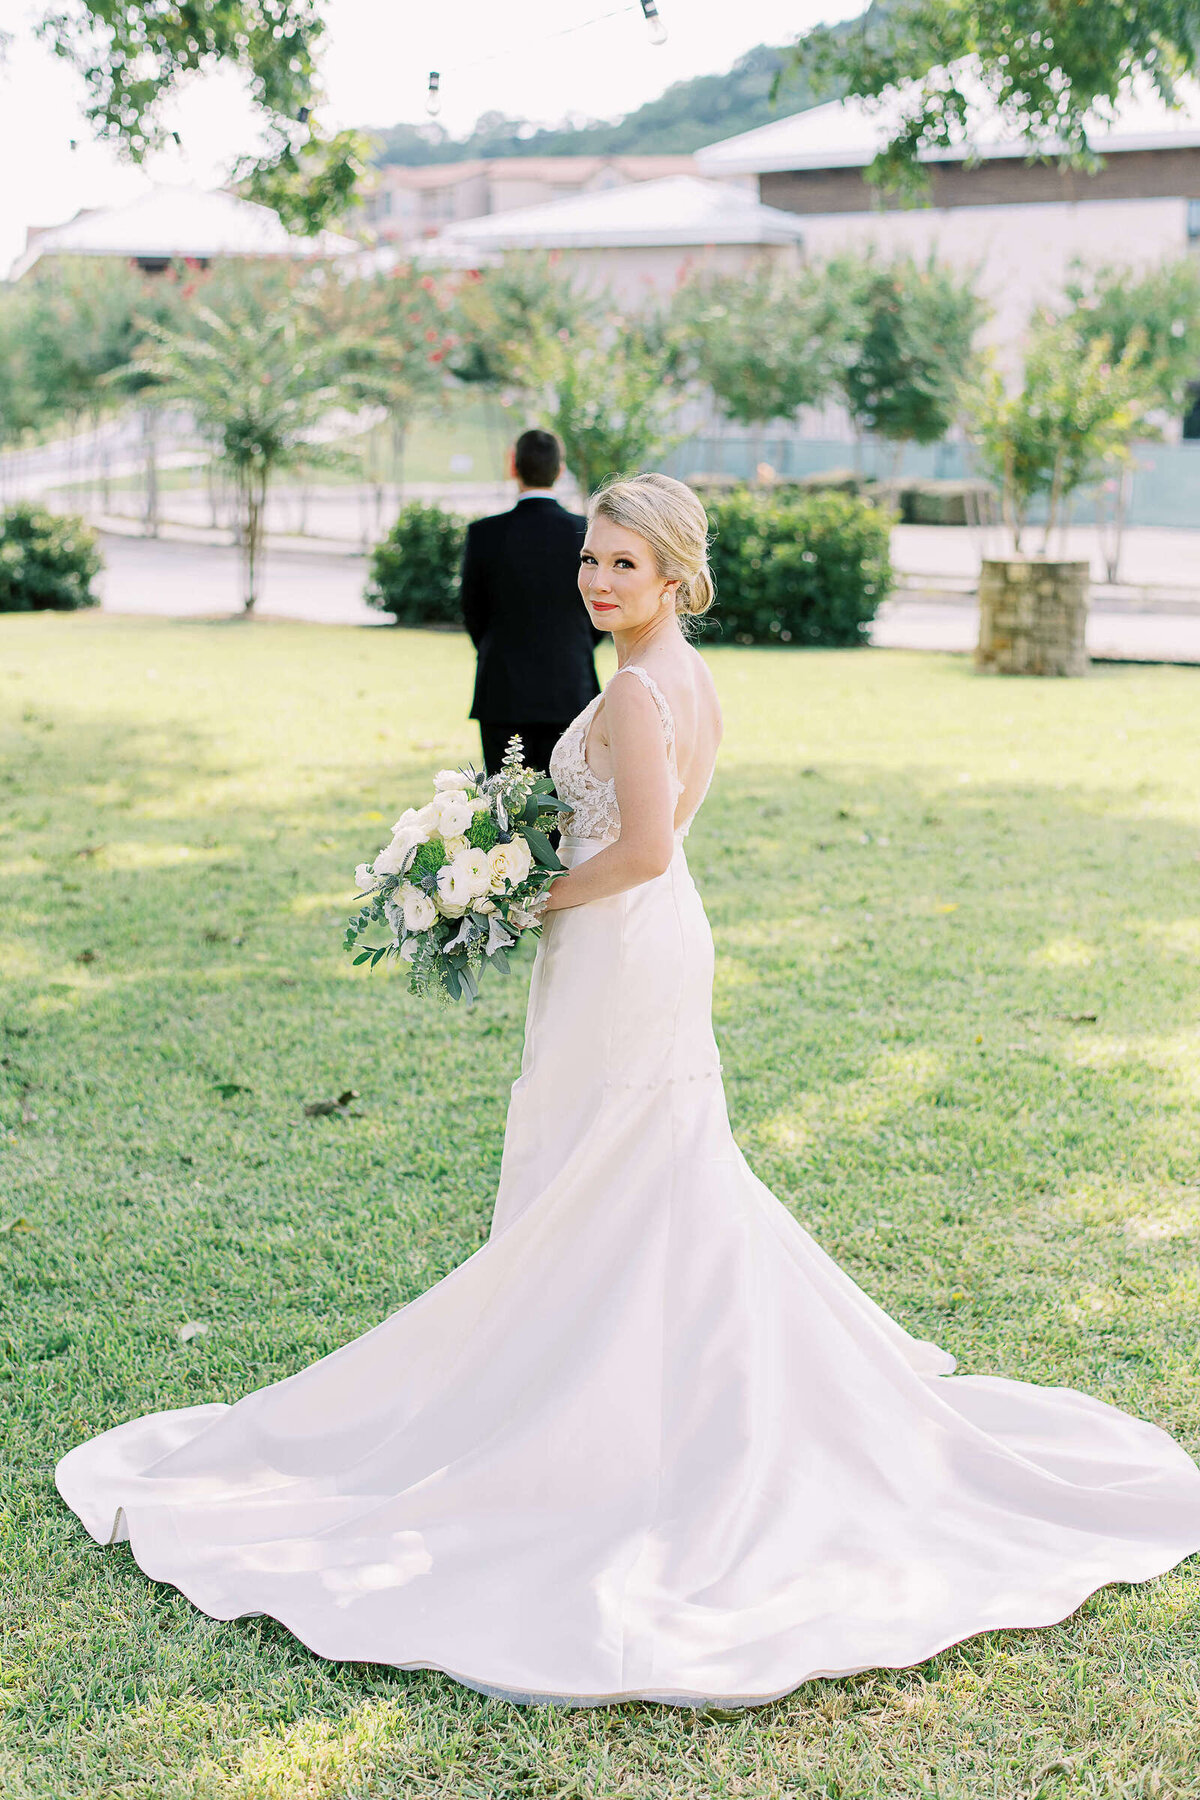 Classic style first look with bride and groom at Texas hill country wedding venue